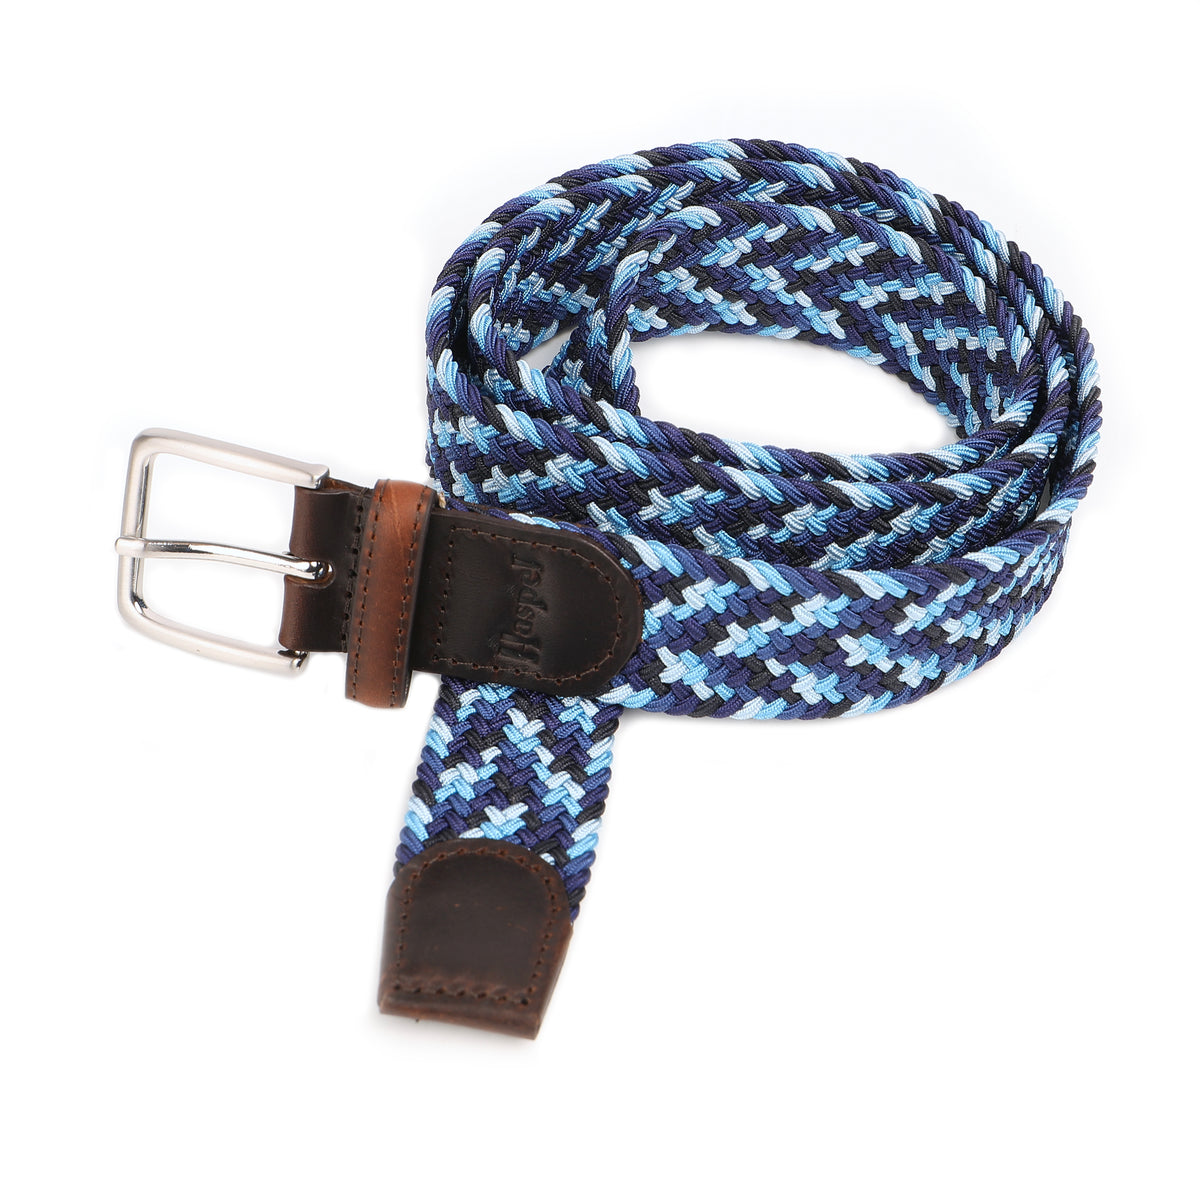 Our braided belts are woven to add a rich style to any look. Featuring leather end tabs, a solid nickel buckle with antique finish, and color choices in both solid and mult-colored of braided elastic.  Alpha Sizing • Braided elastic • Leather End Tabs • 1-1/4&quot; Wide • Solid Nickel Buckle, Antique Finish • Imported